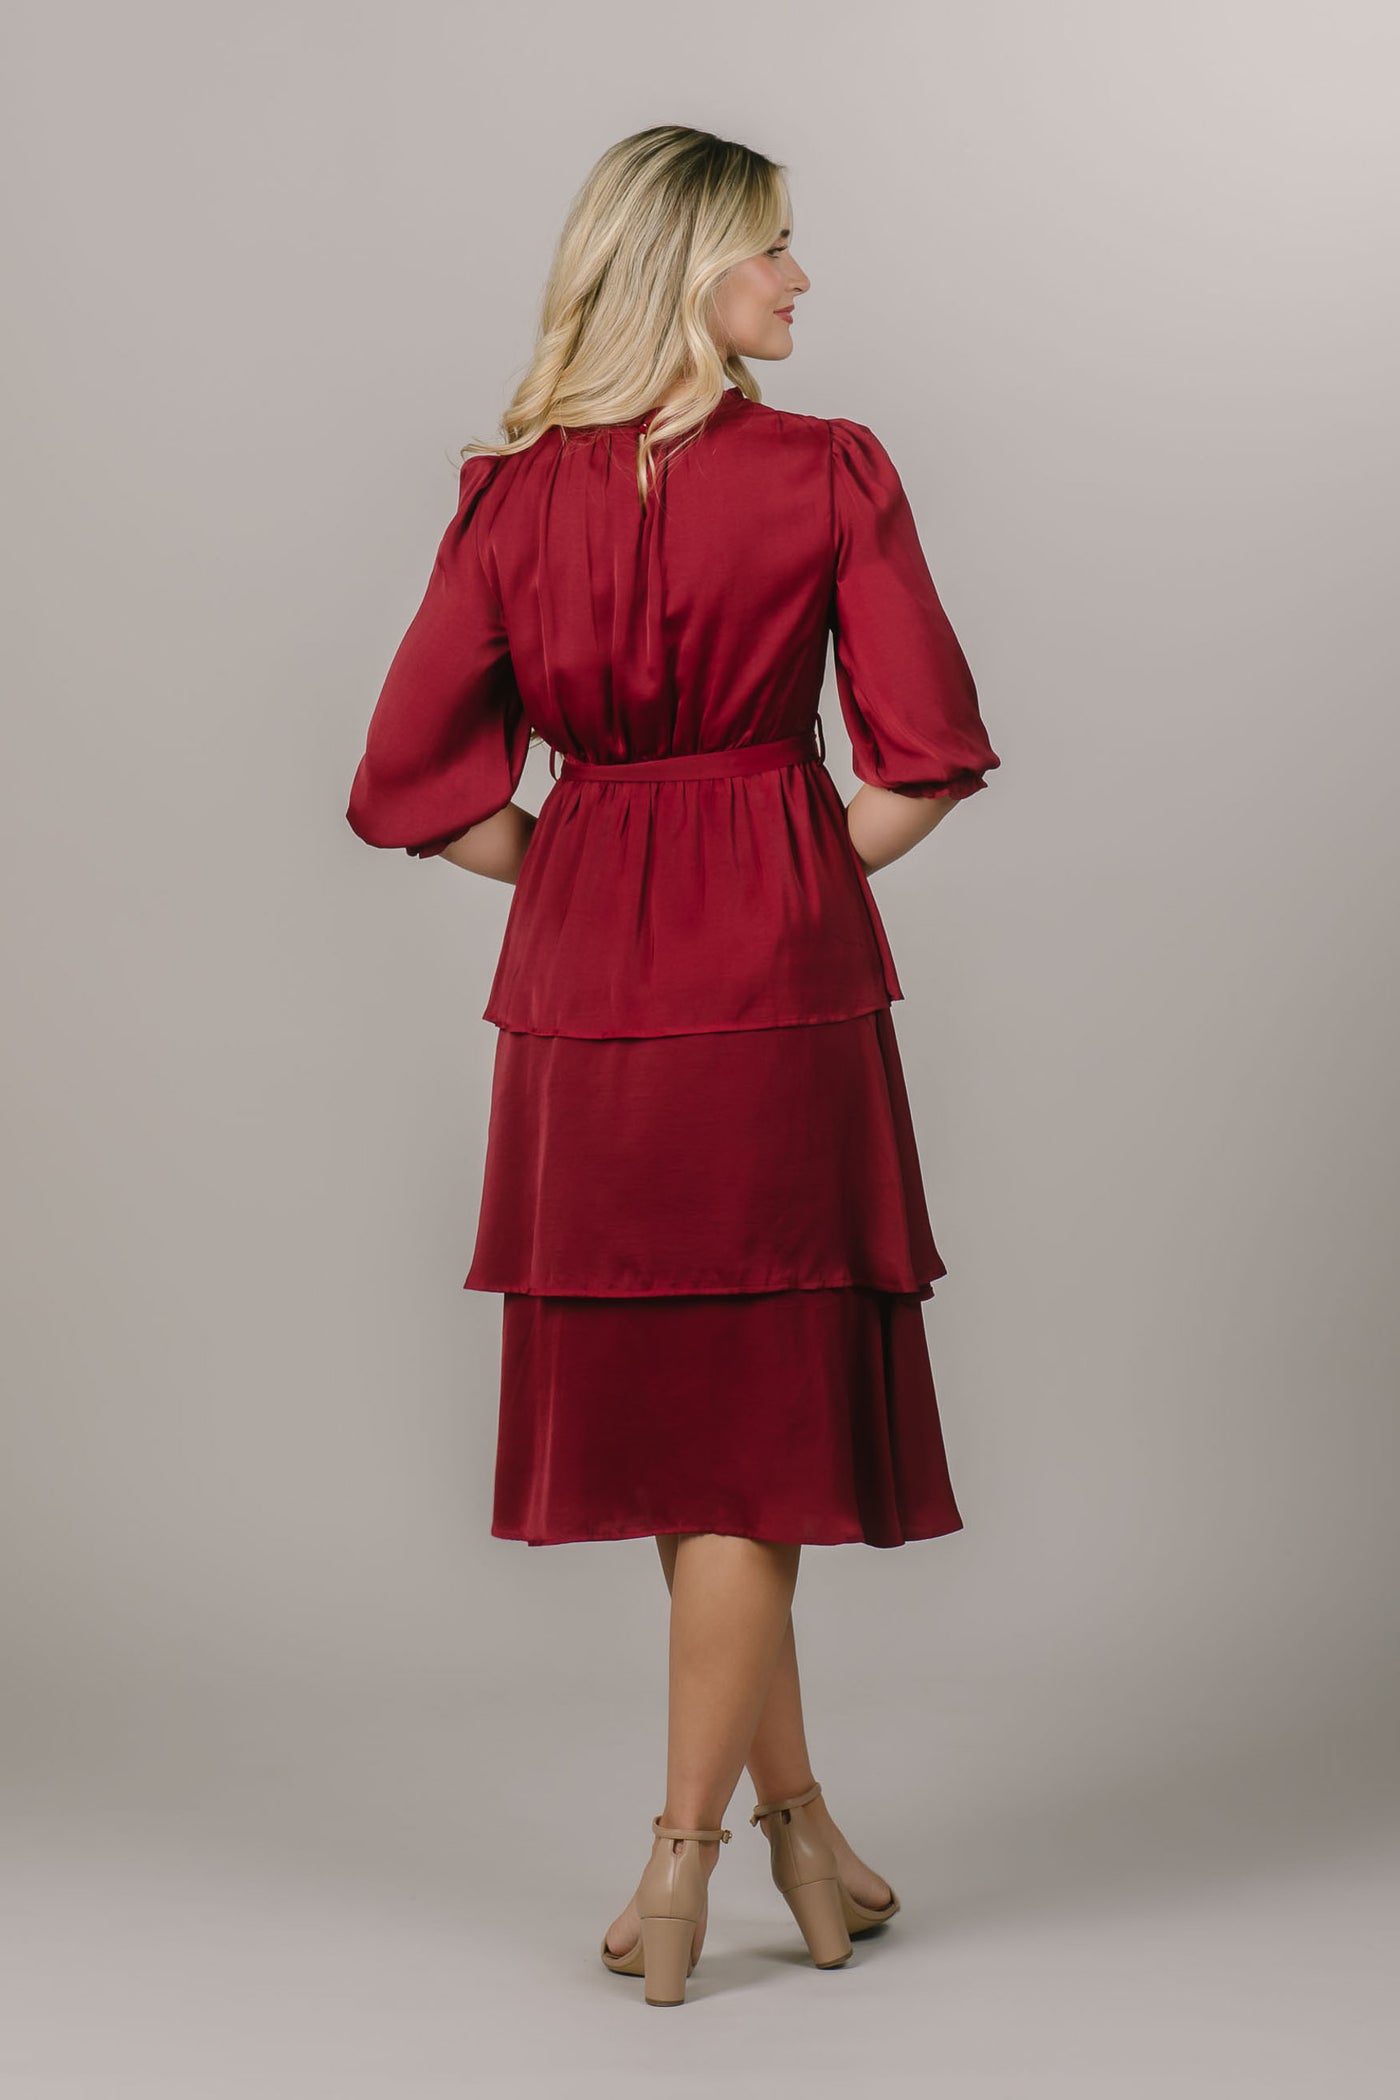 This is a modest dress with a tiered skirt and a silky smooth fabric.